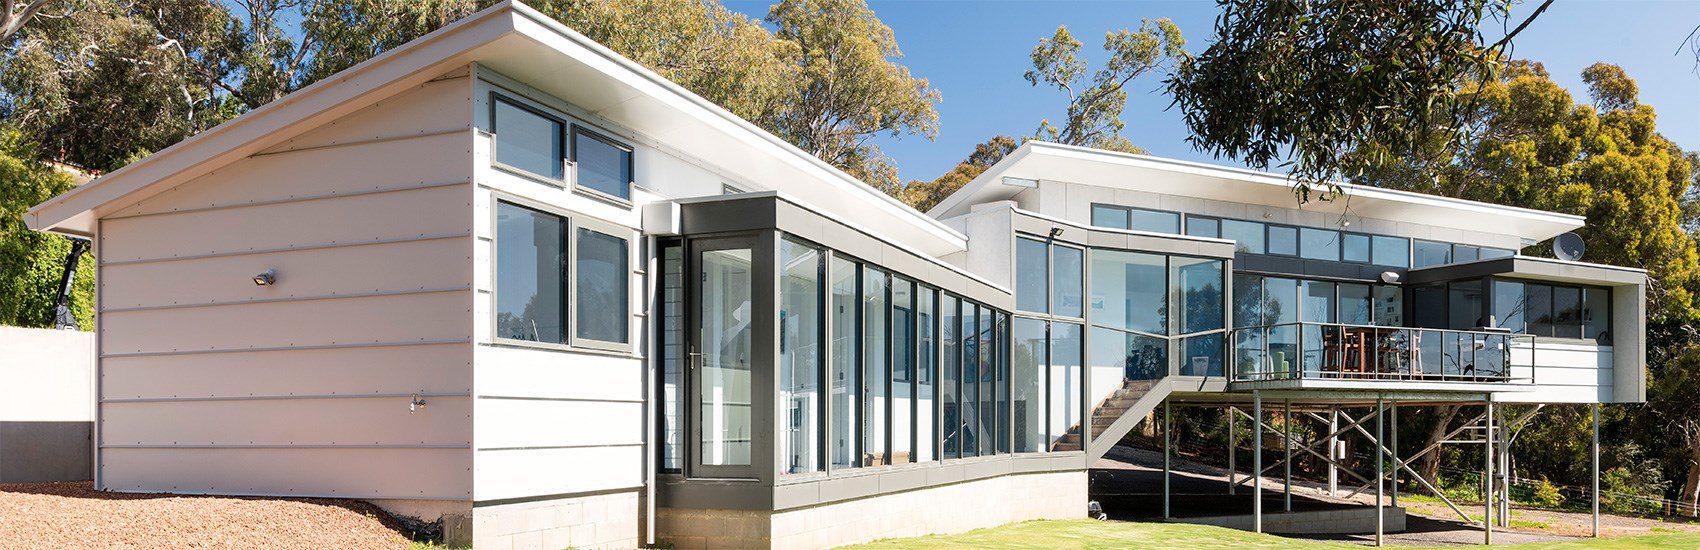 Barestone seamlessly connects with a WA bush backdrop